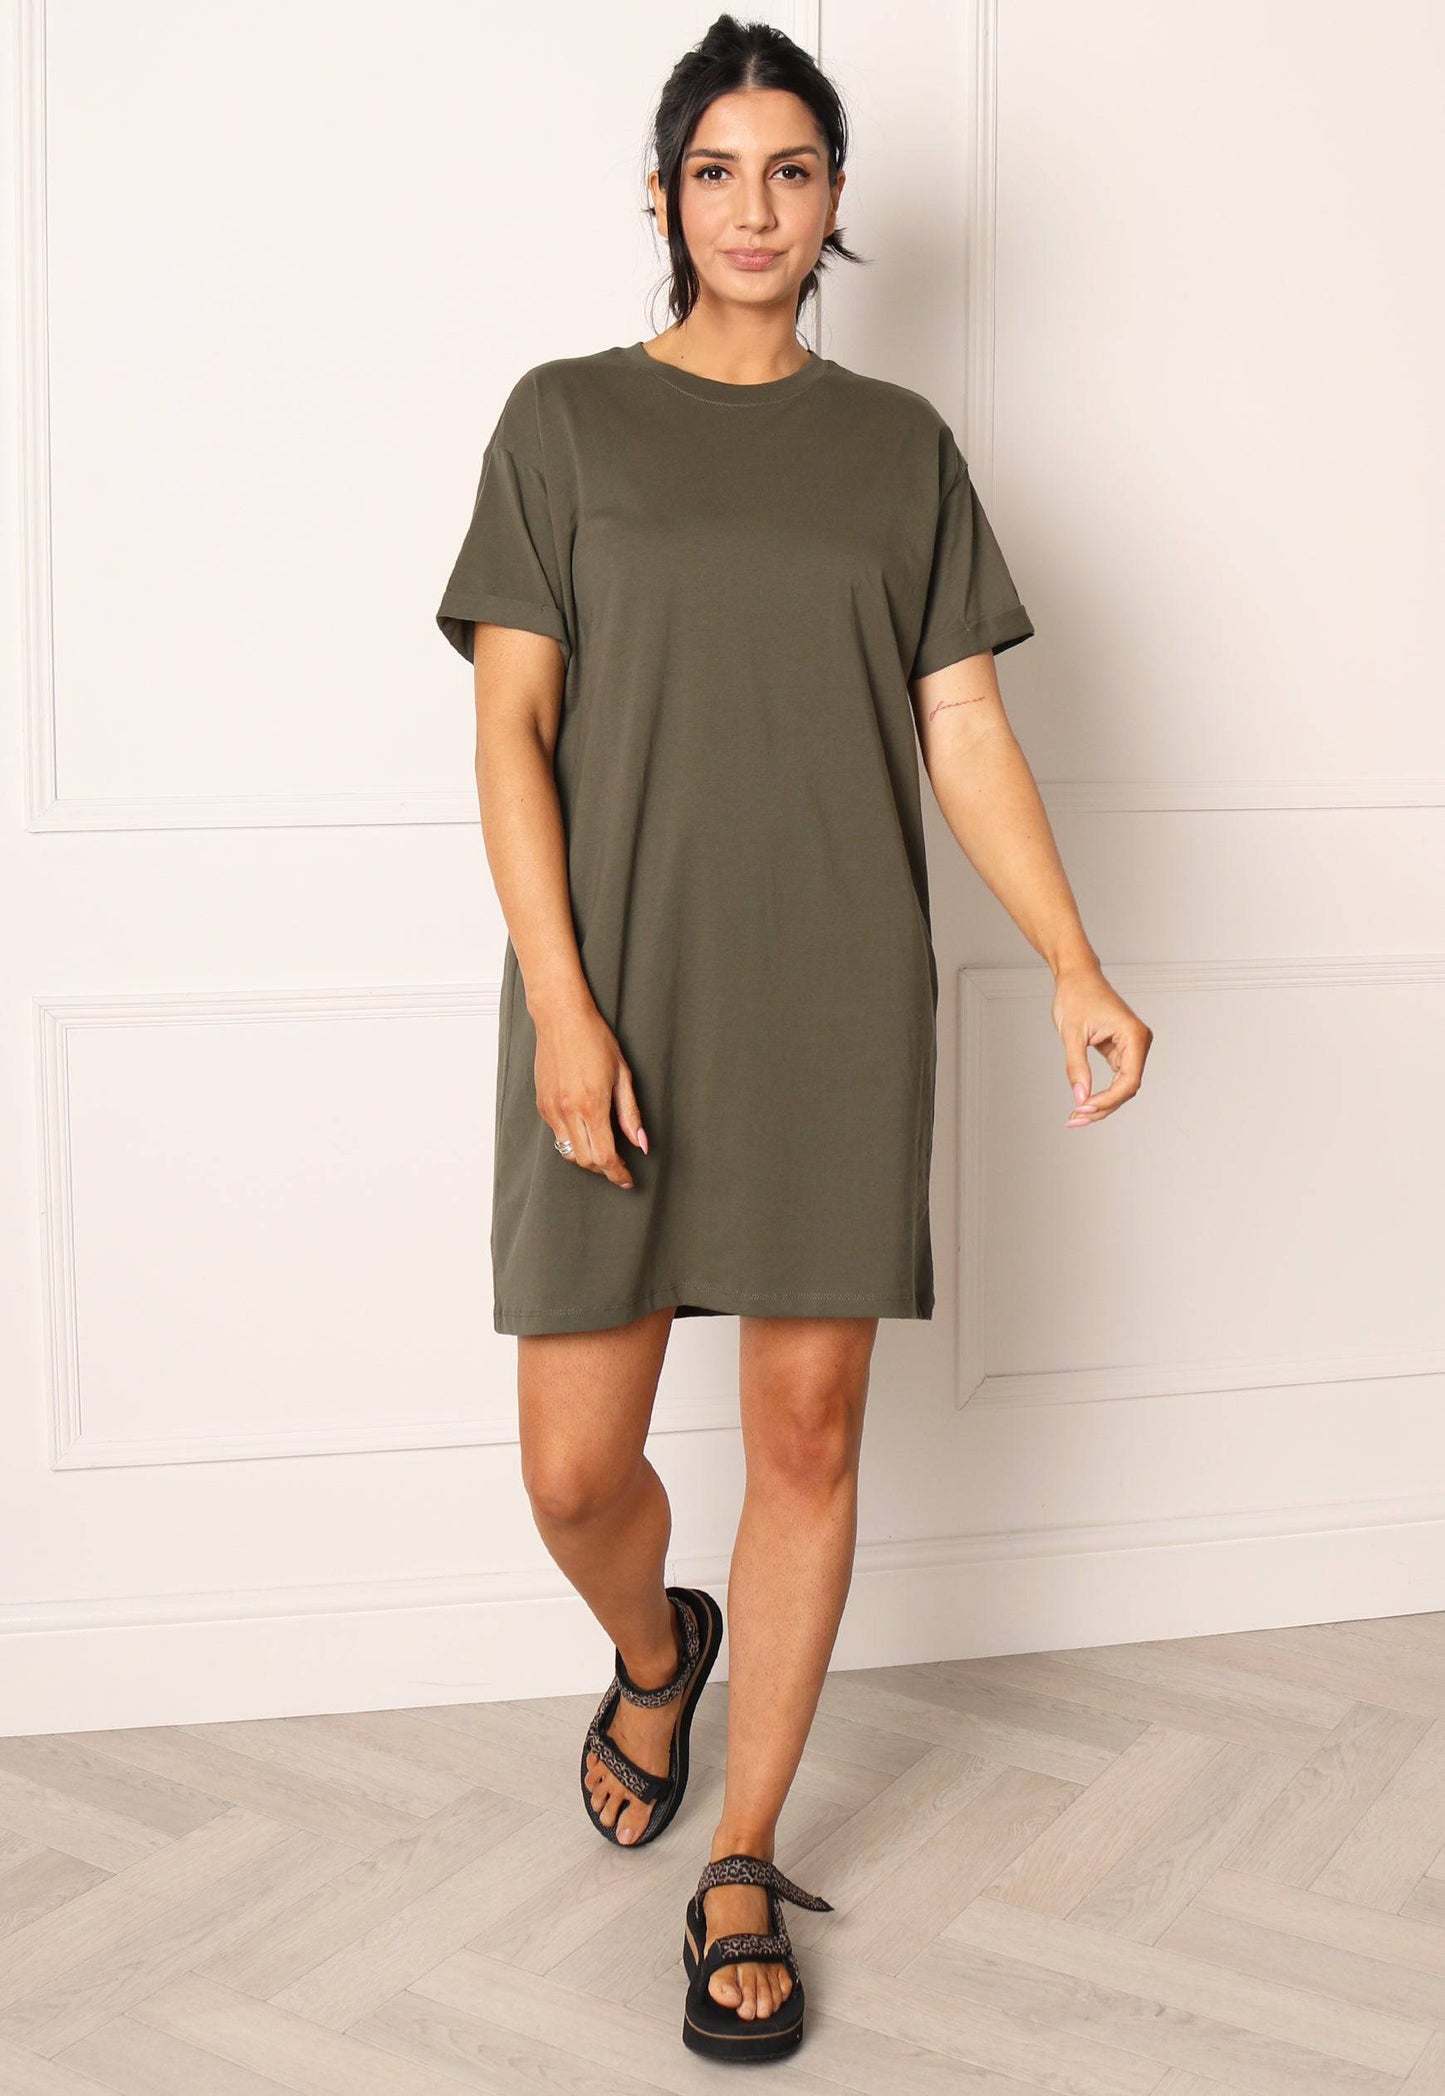 PIECES Ria Cotton T-Shirt Dress in Khaki - One Nation Clothing